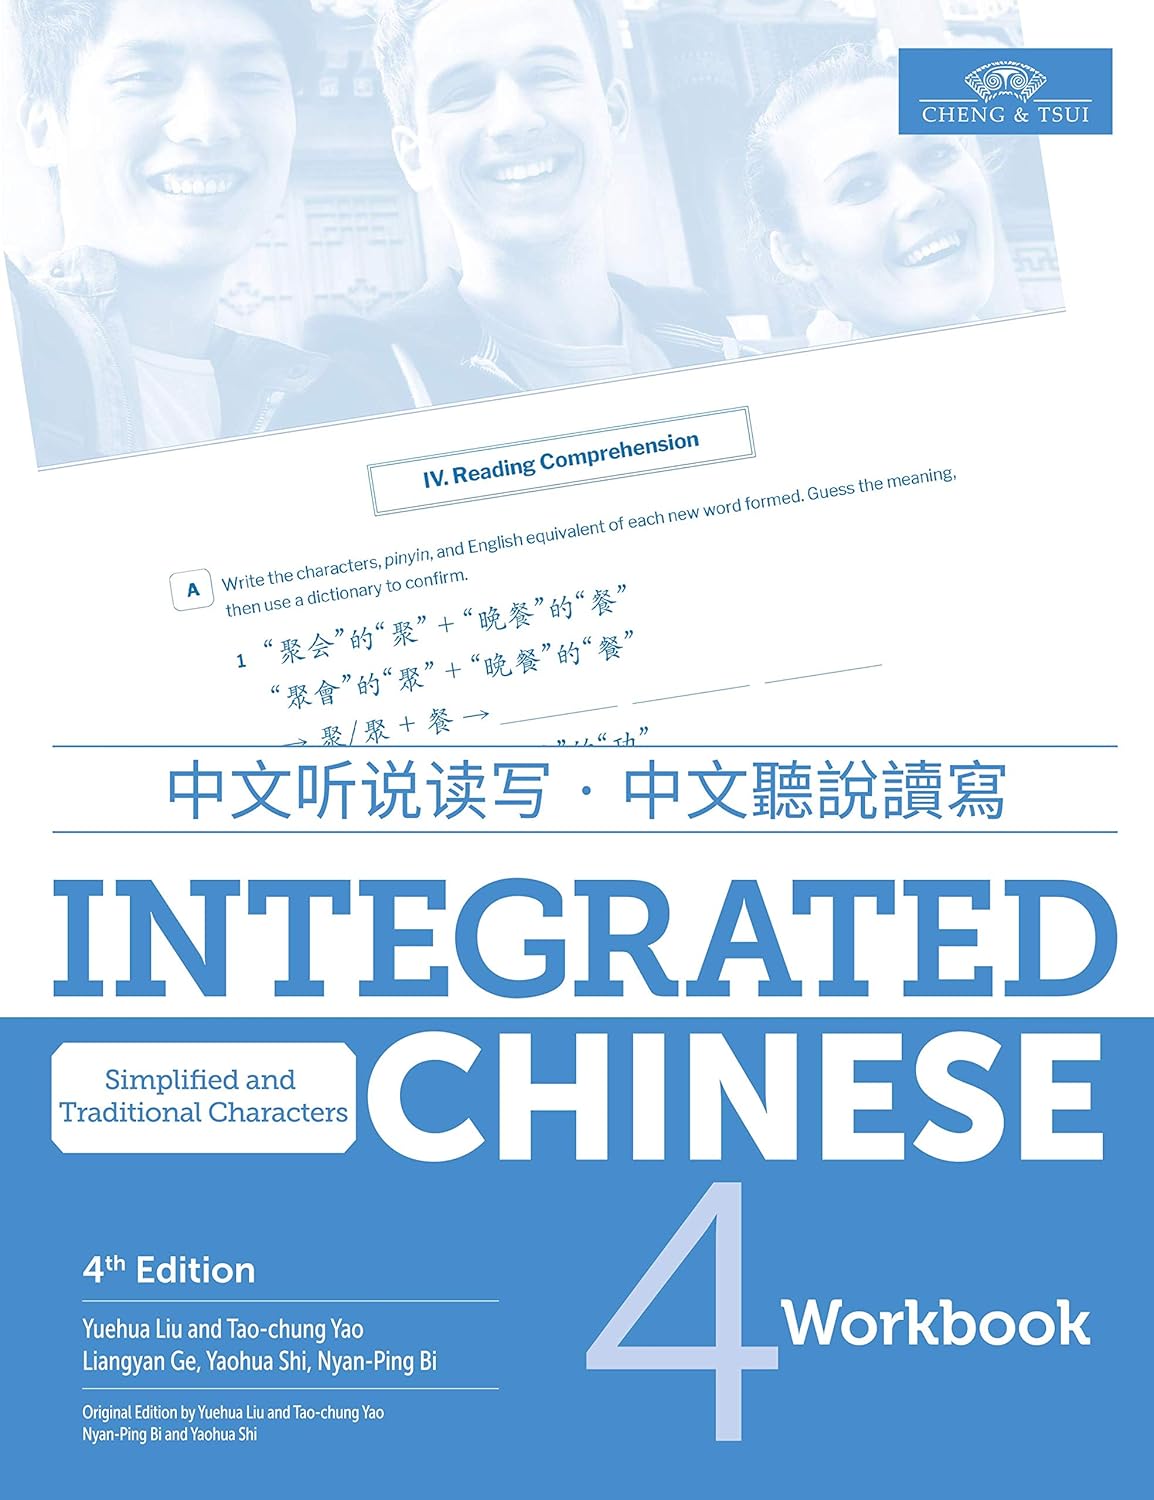 Integrated Chinese 4 - Workbook (Simplified Chinese)(4th Edition)